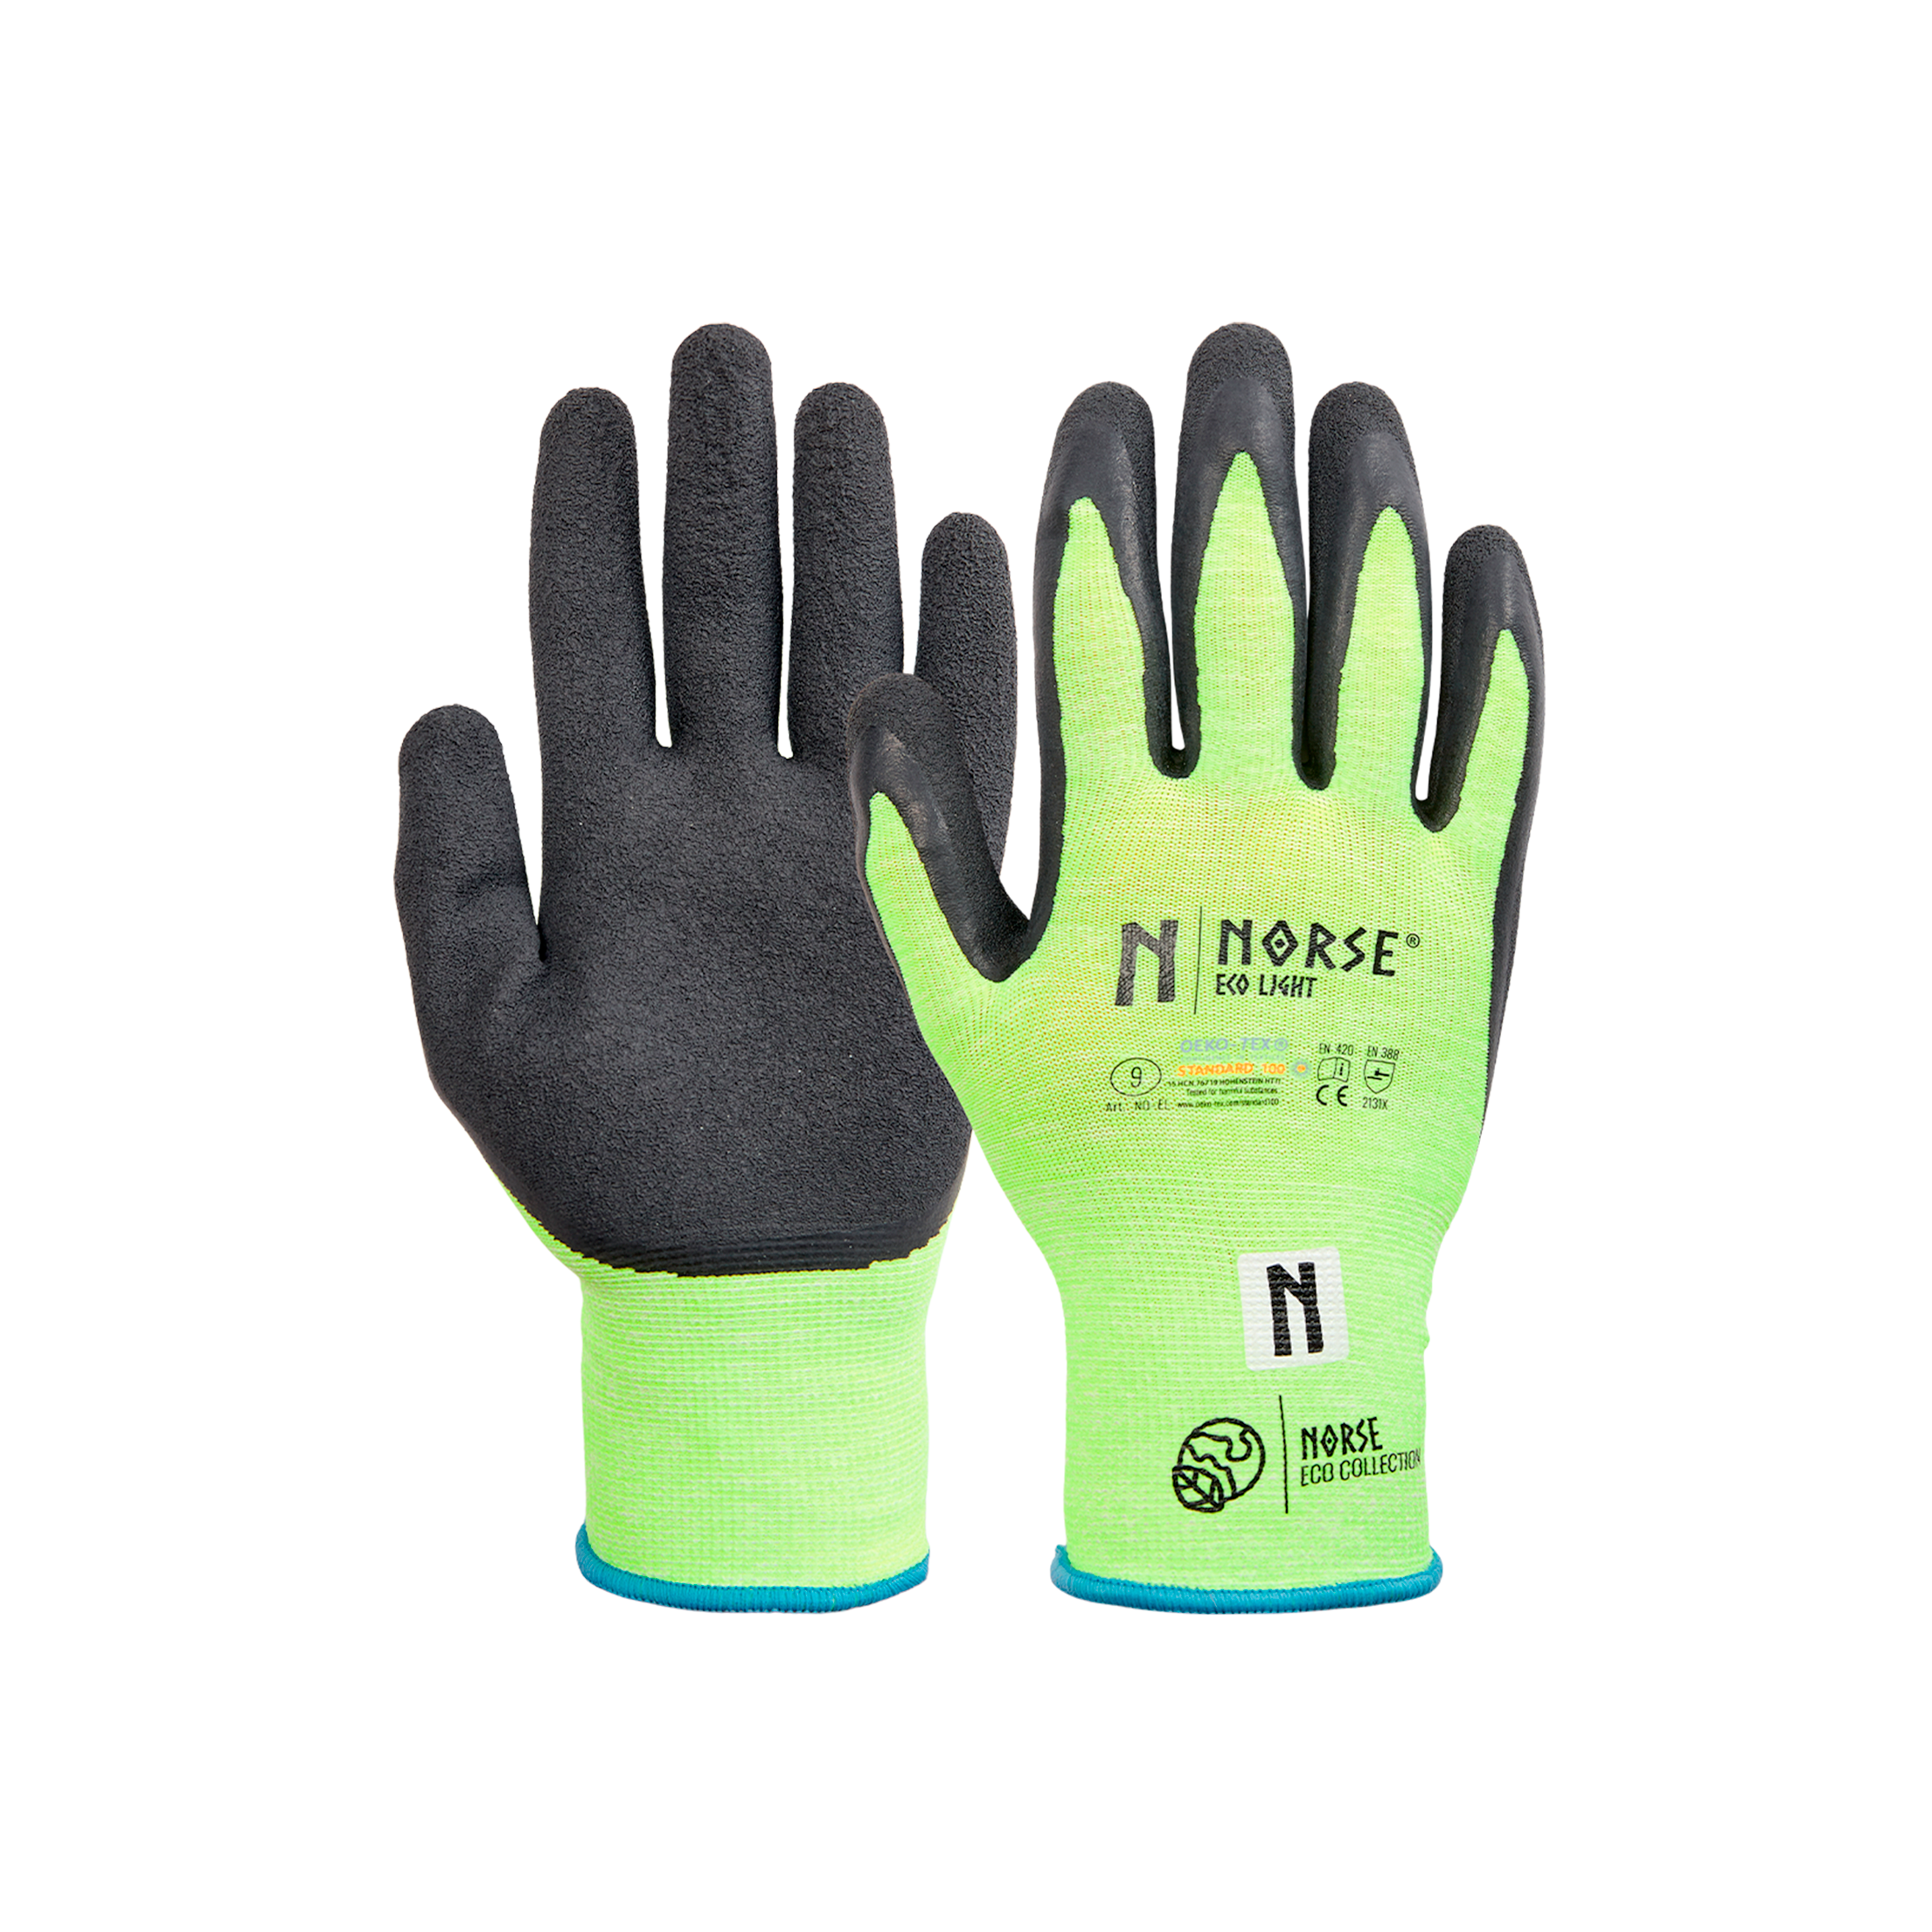 ECO Light | High Visibility Assembly Gloves